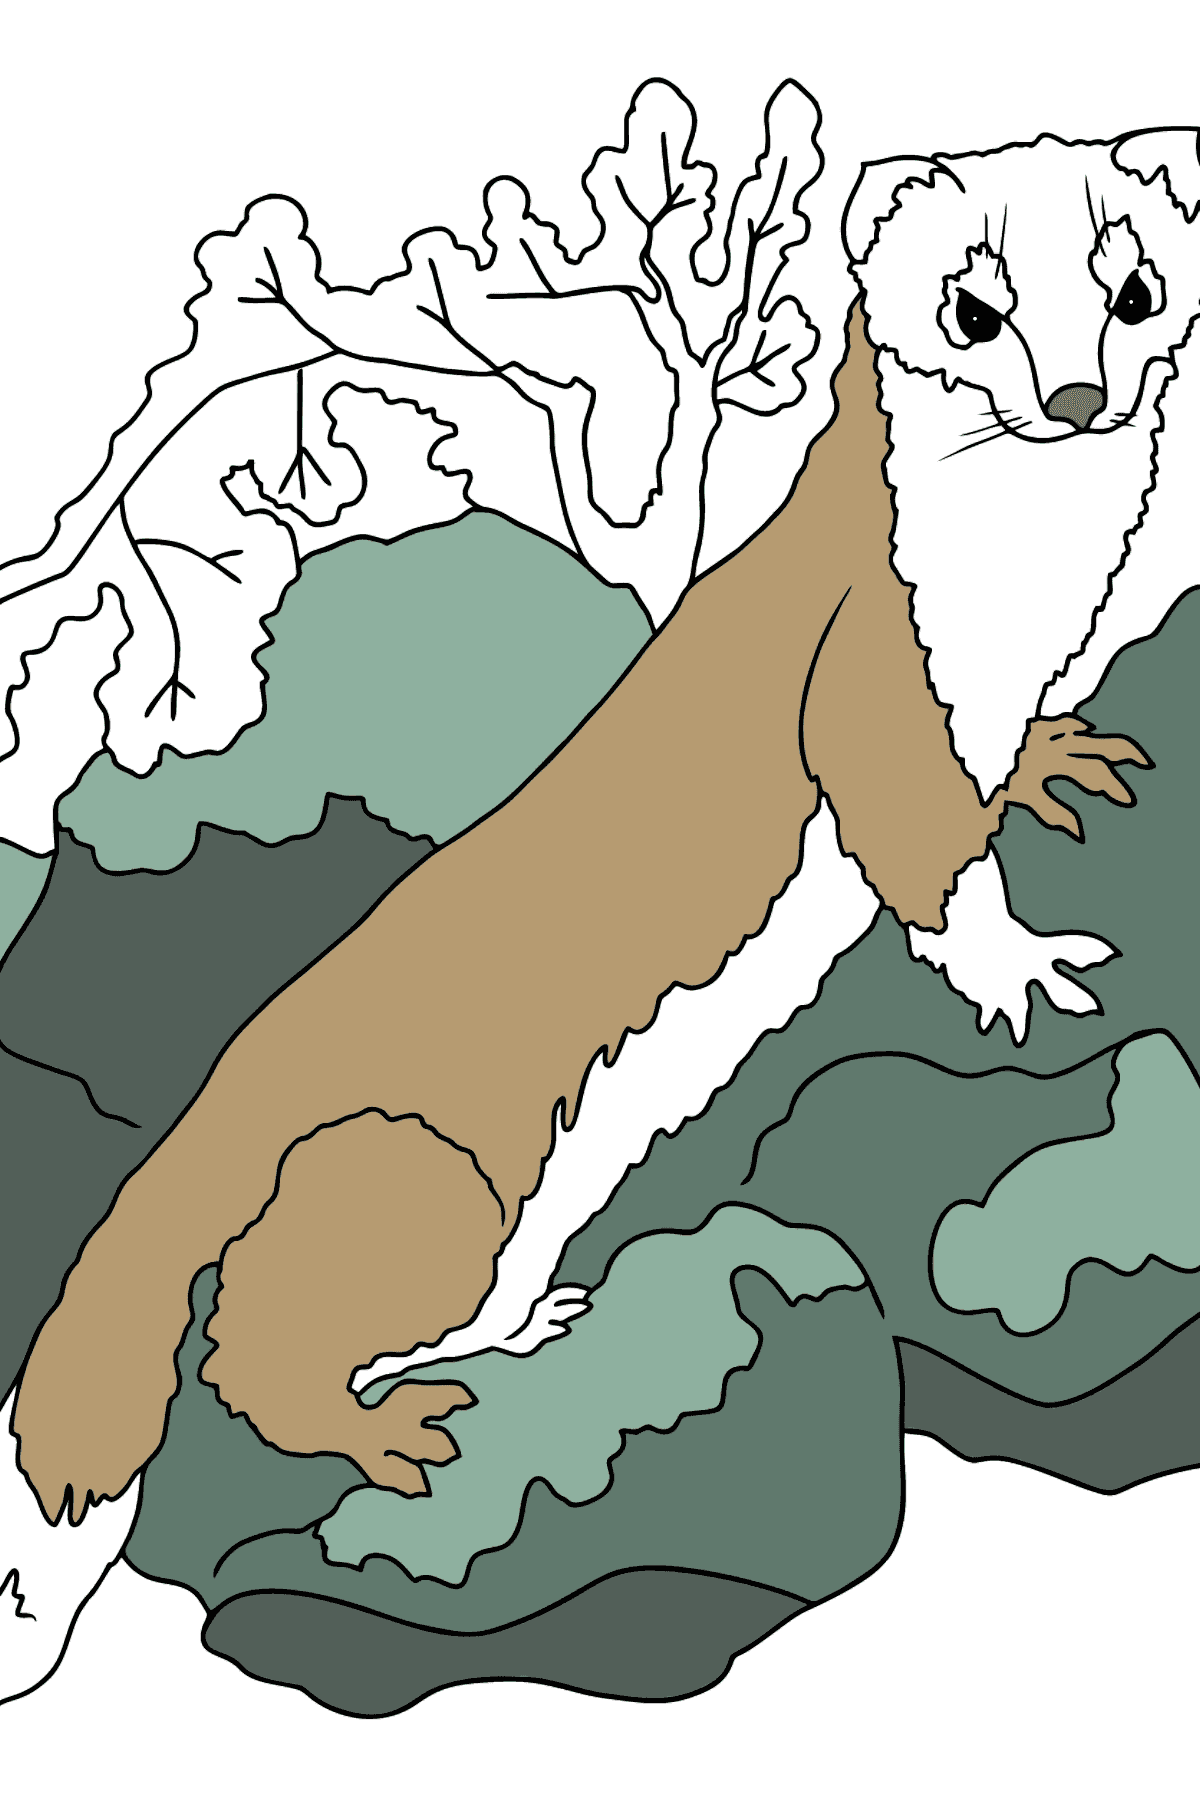 Coloring Page - An Ermine - A Small Fast Animal - Coloring Pages for Kids